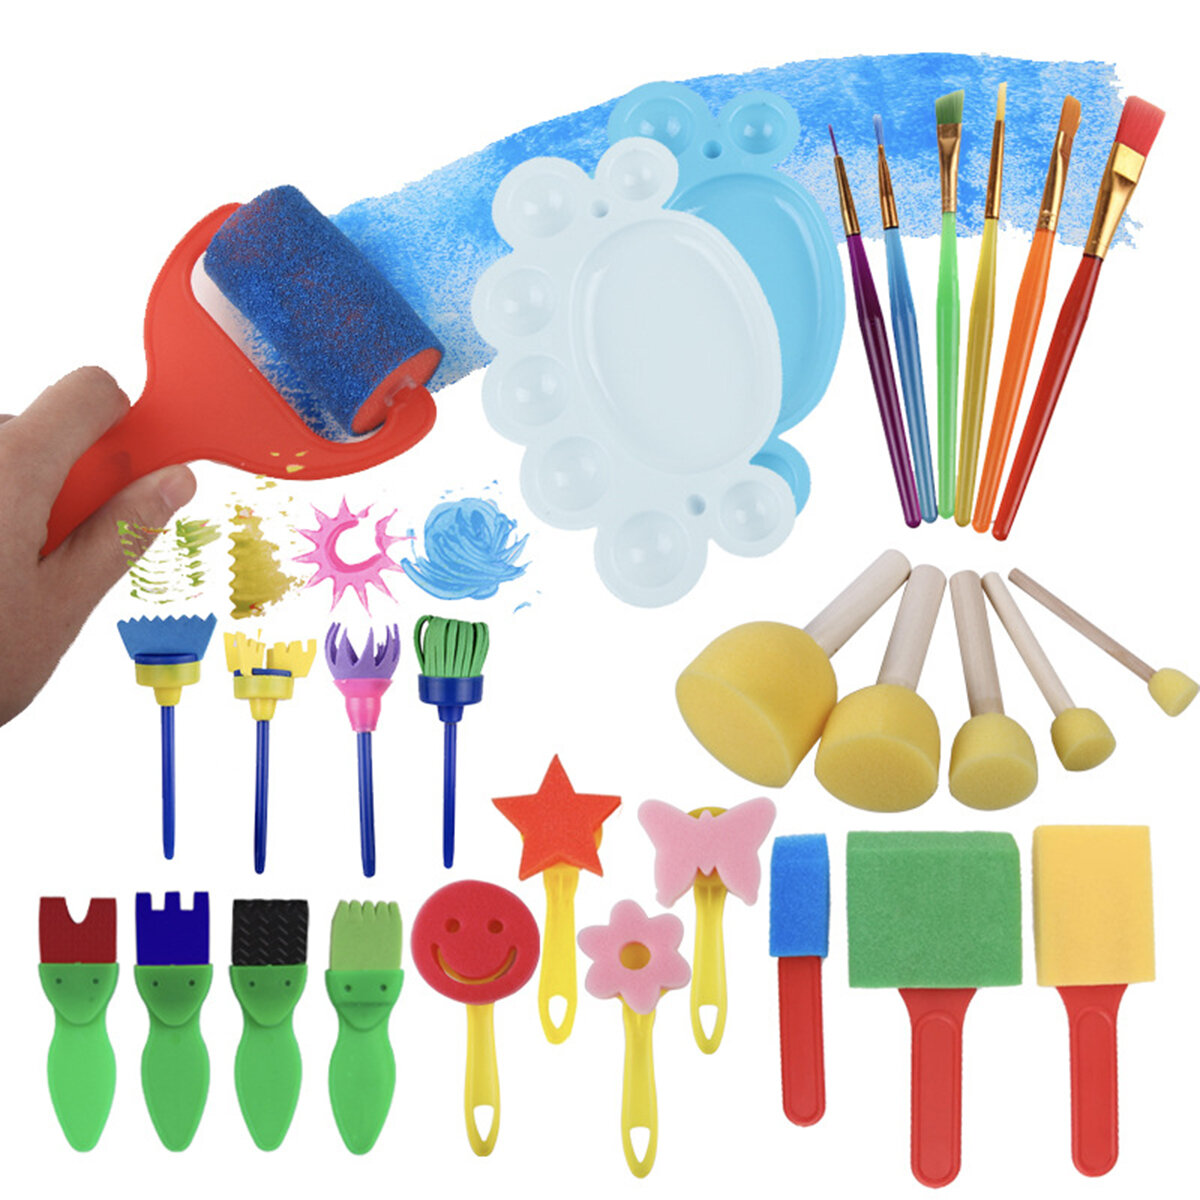 Drawing Funny Creative Toys DIY Graffiti Art Supplies Brushes Seal Painting Tool Montessori Rubber S